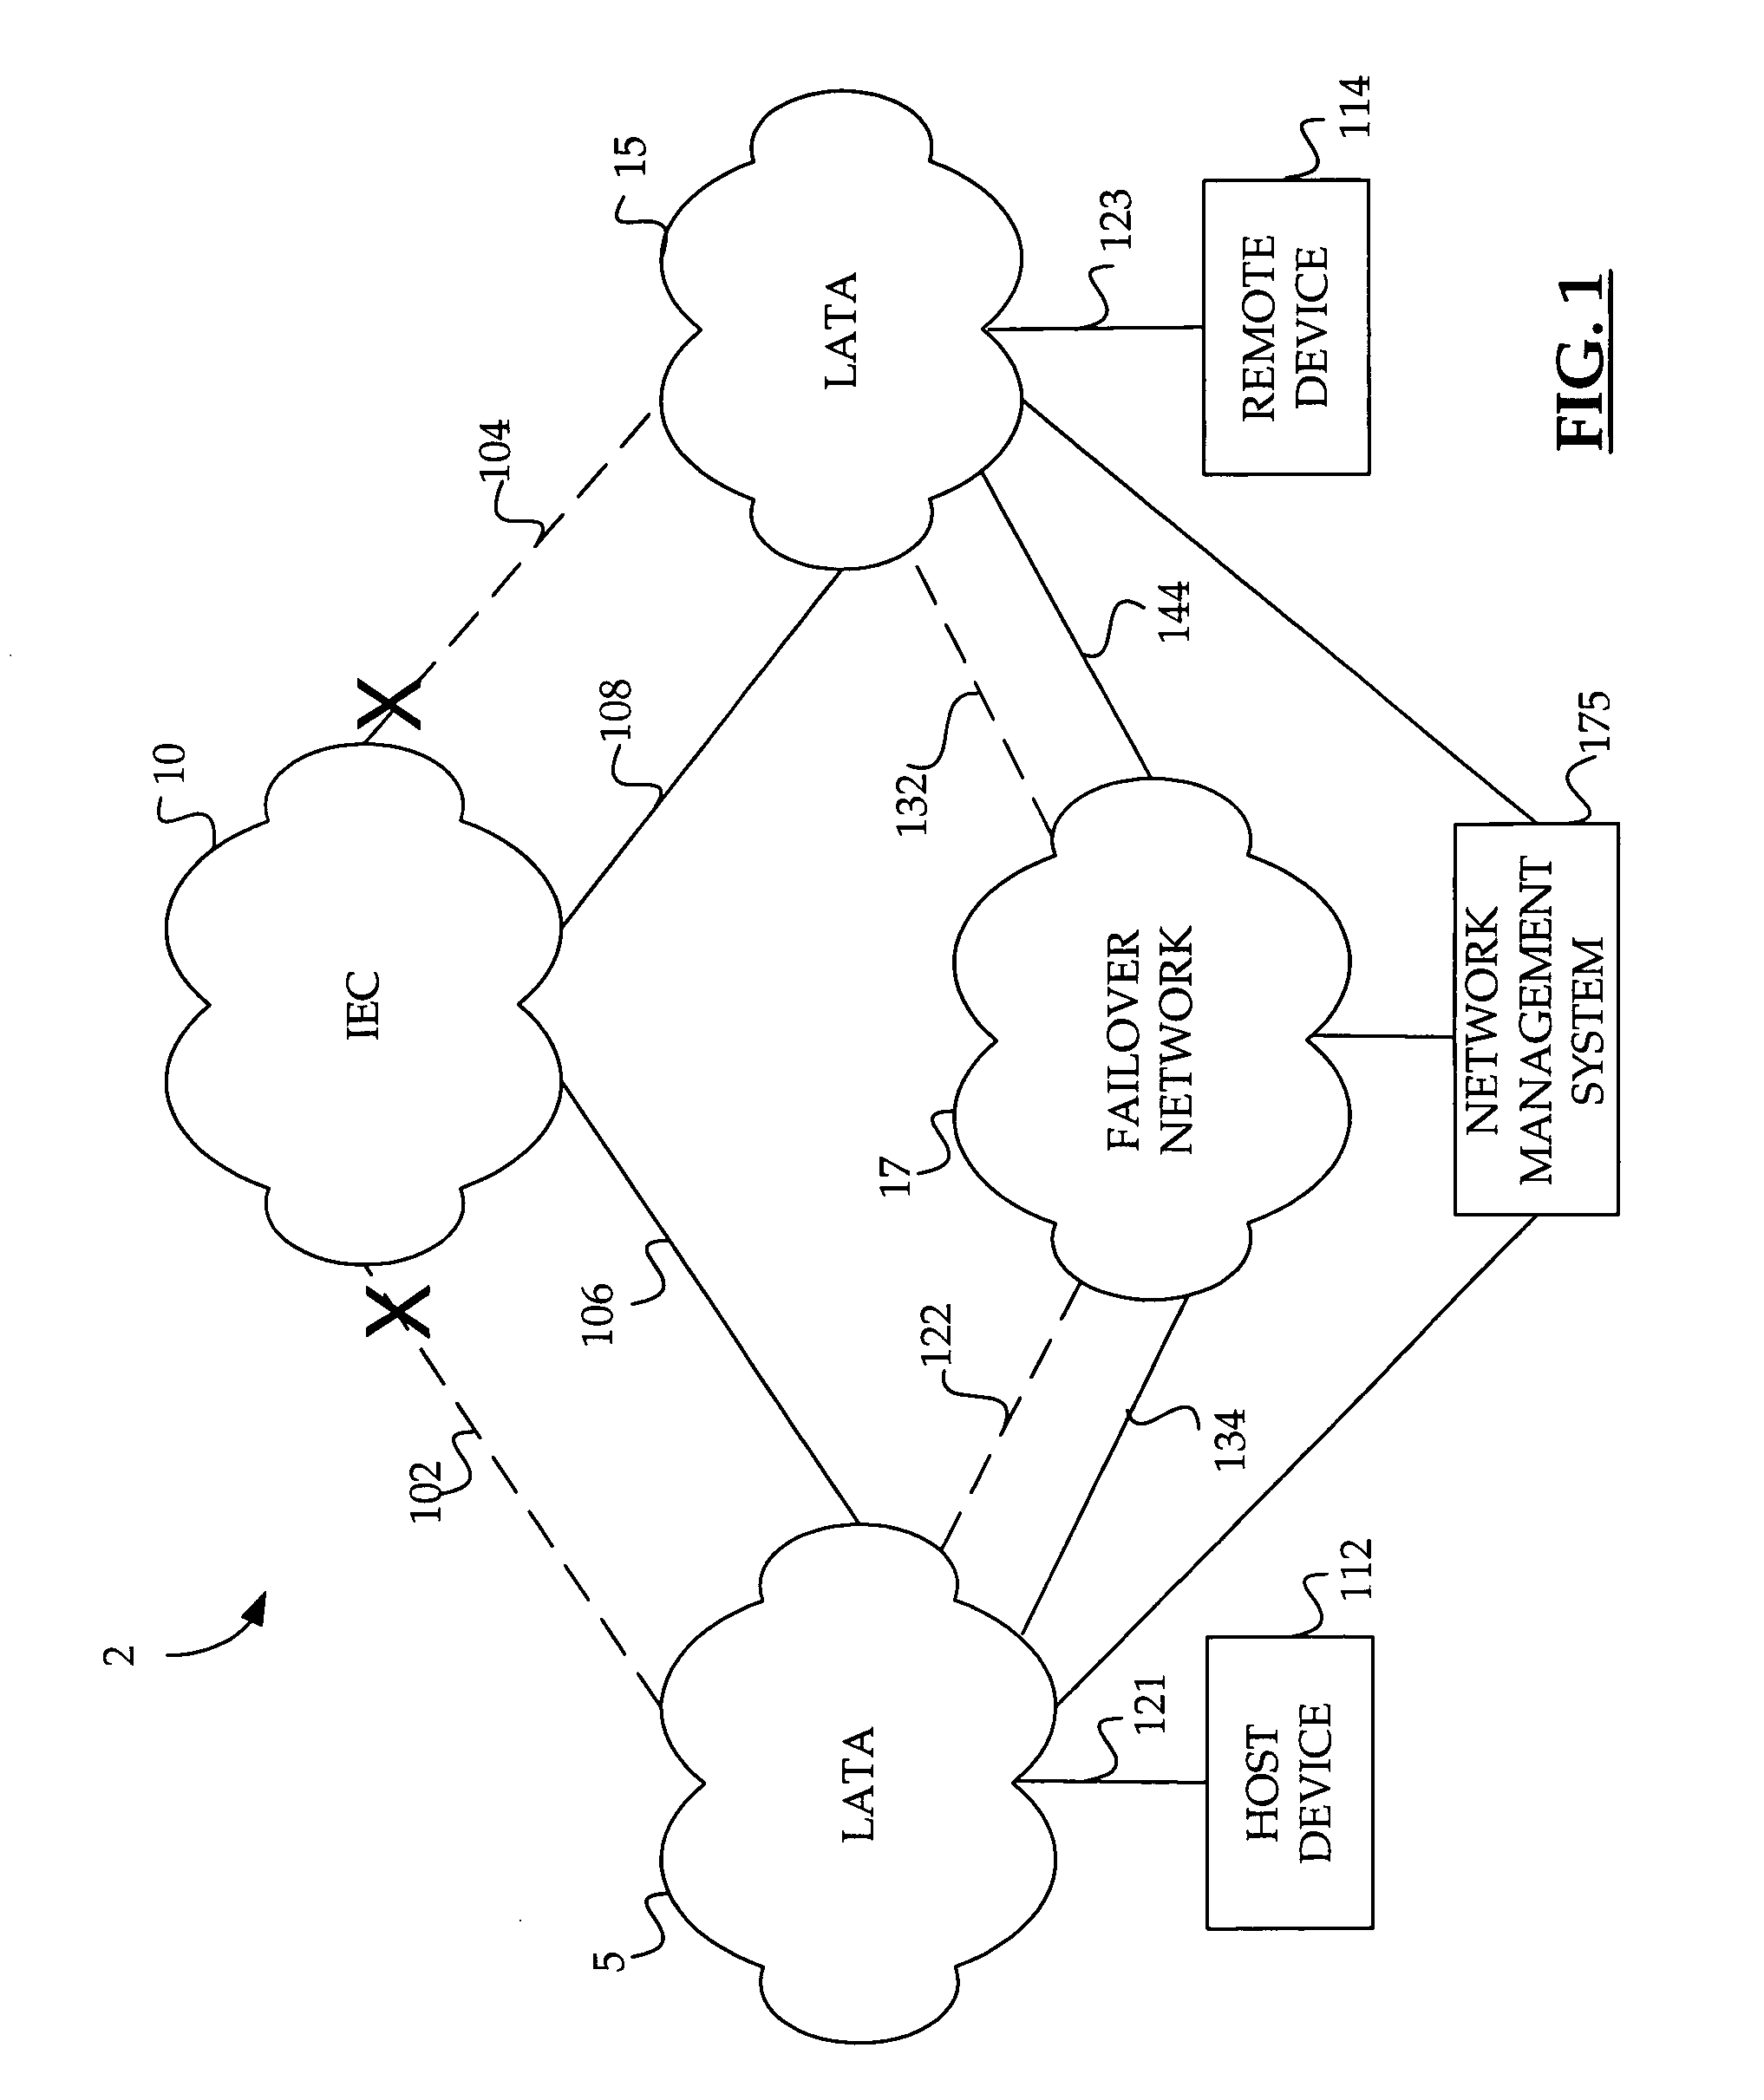 Method and system for prioritized rerouting of logical circuit data in a data network